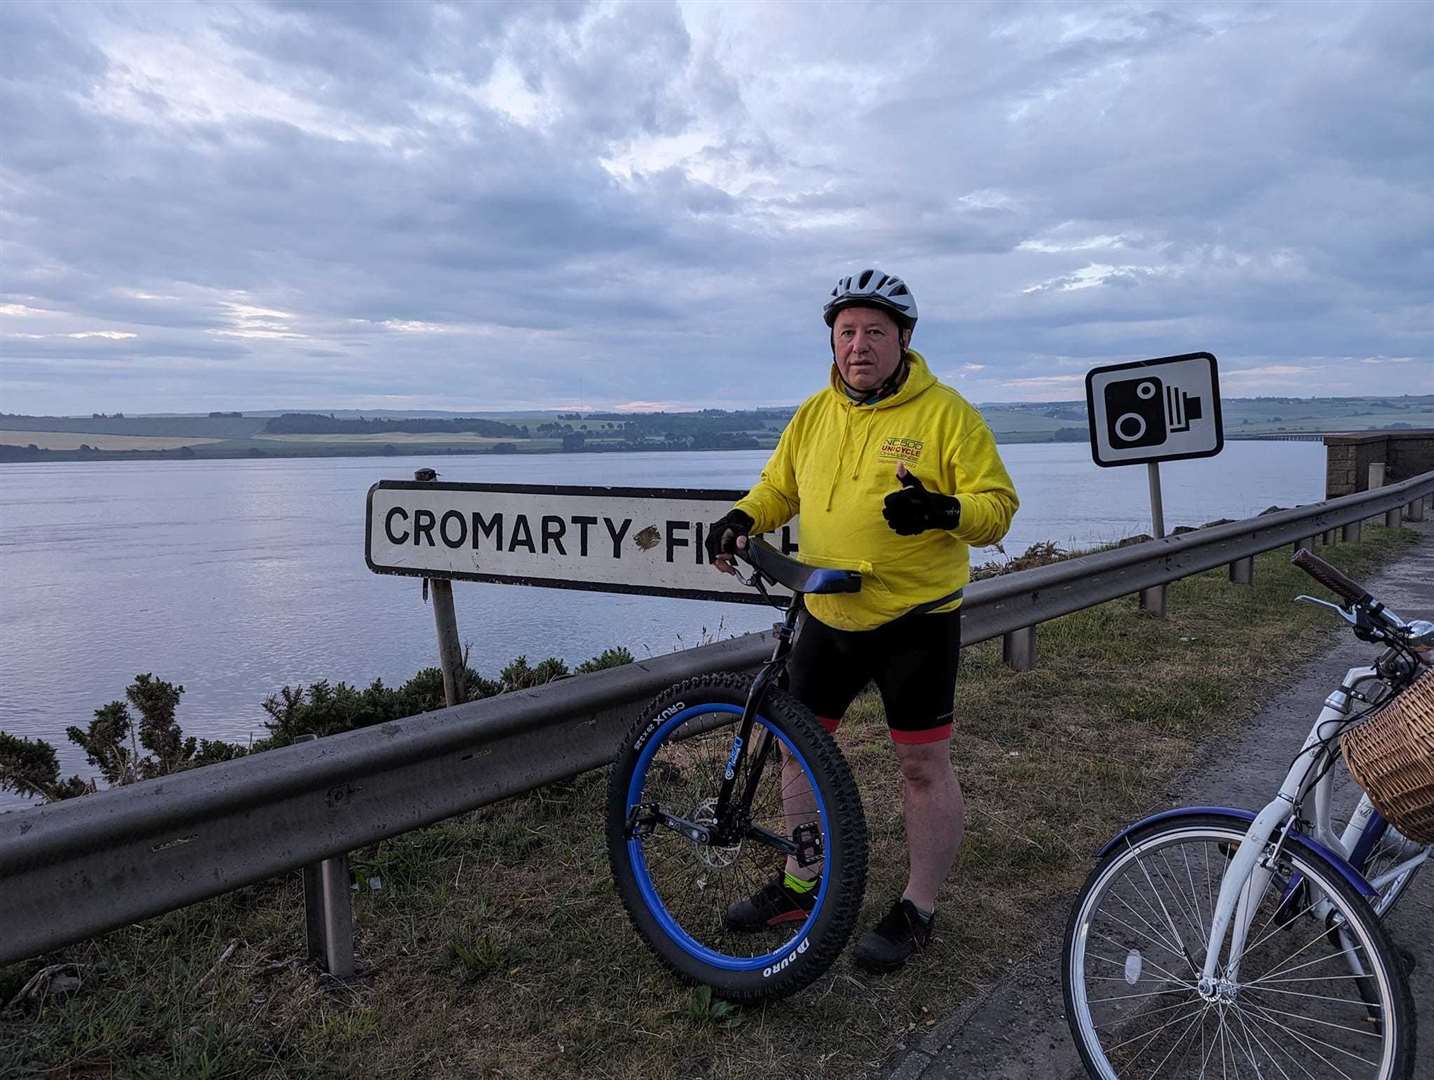 The first bridge of the day over the Cromarty Firth.